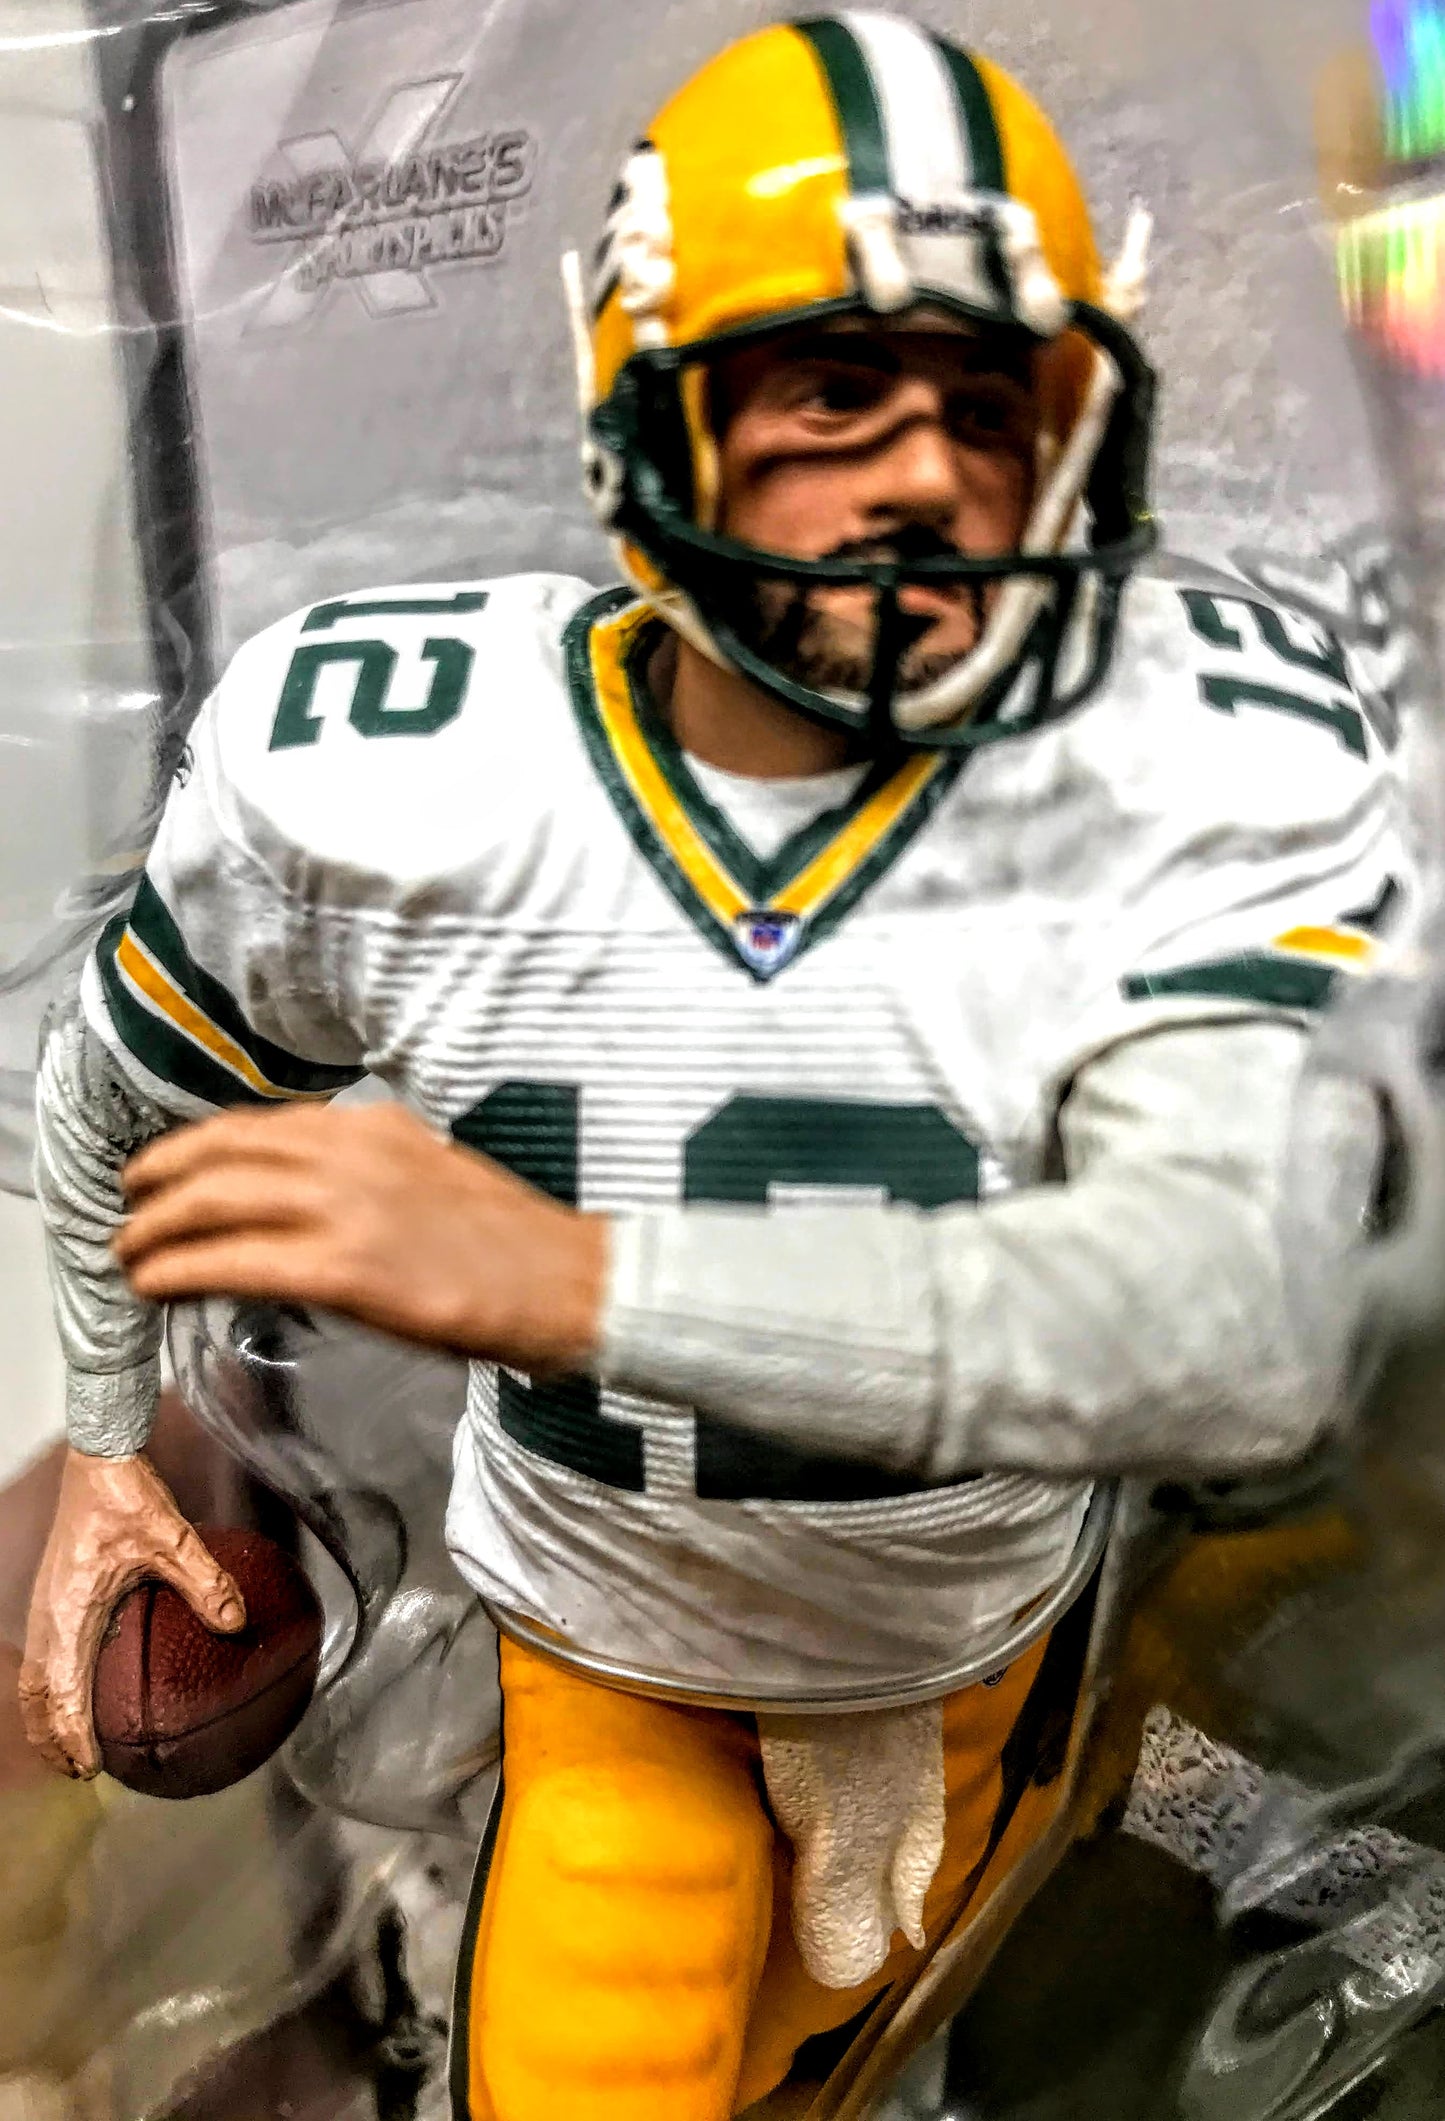 Aaron Rodgers AUTOGRAPHED